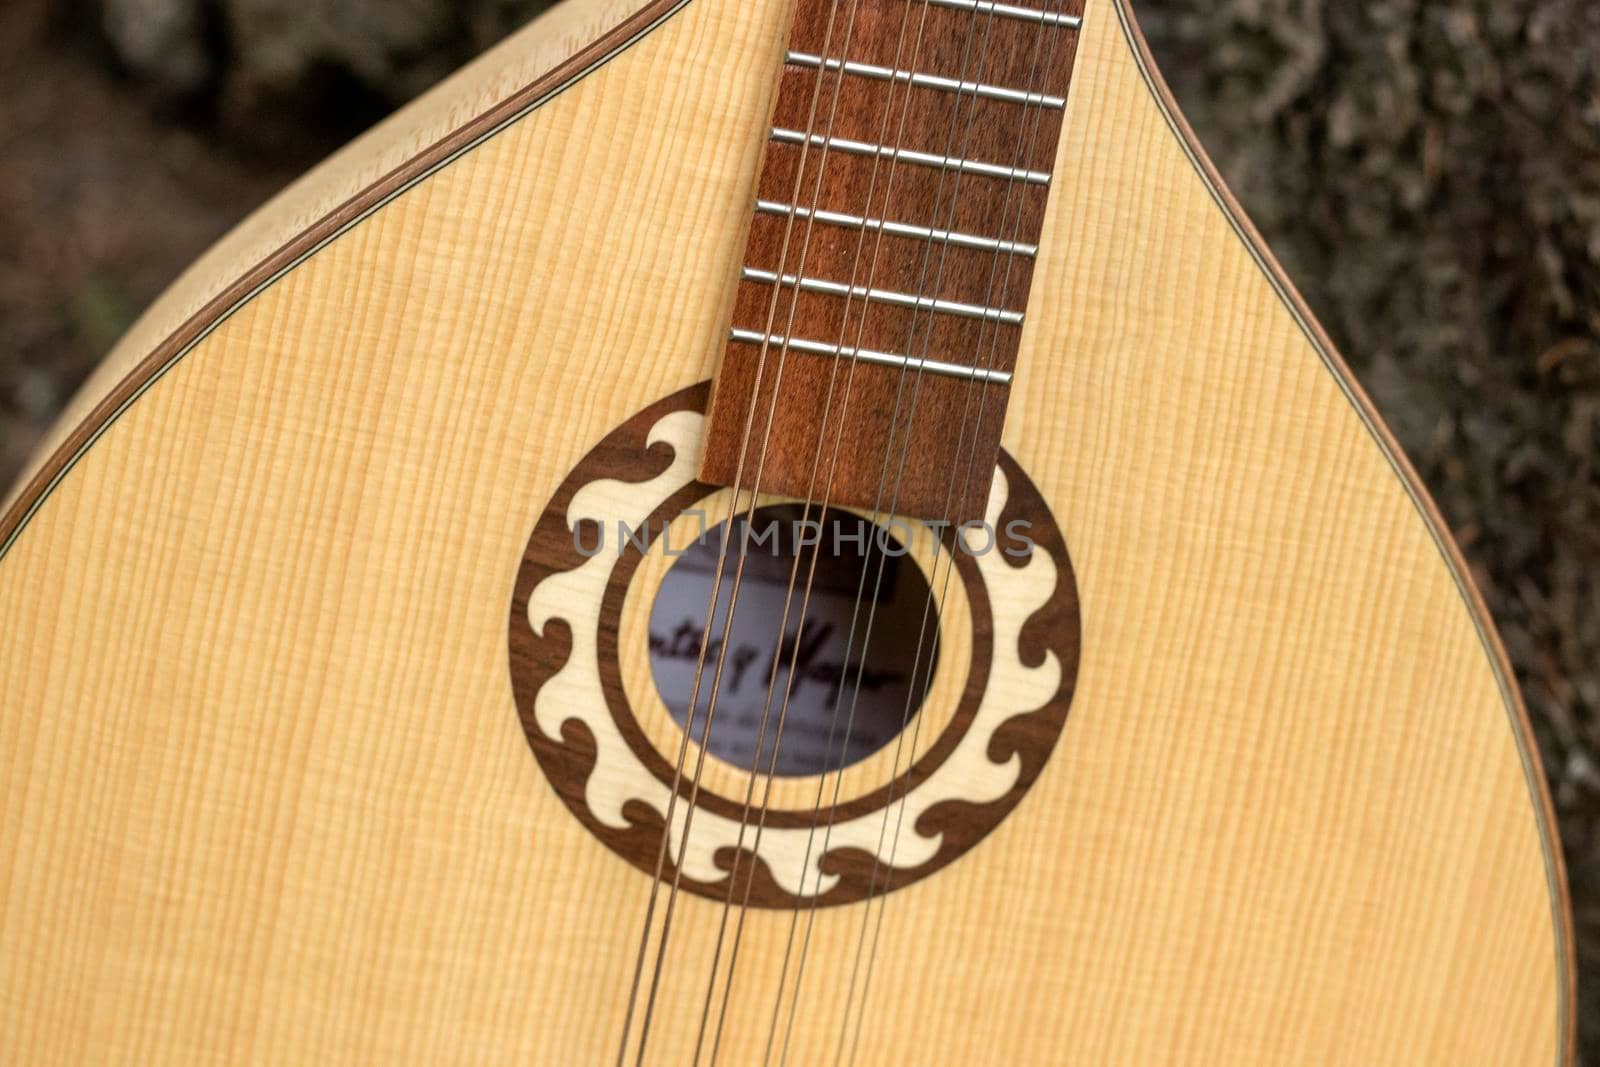 The national Greek string-plucked musical instrument Bouzouki was leaned against a tree. The concept of music and nature.